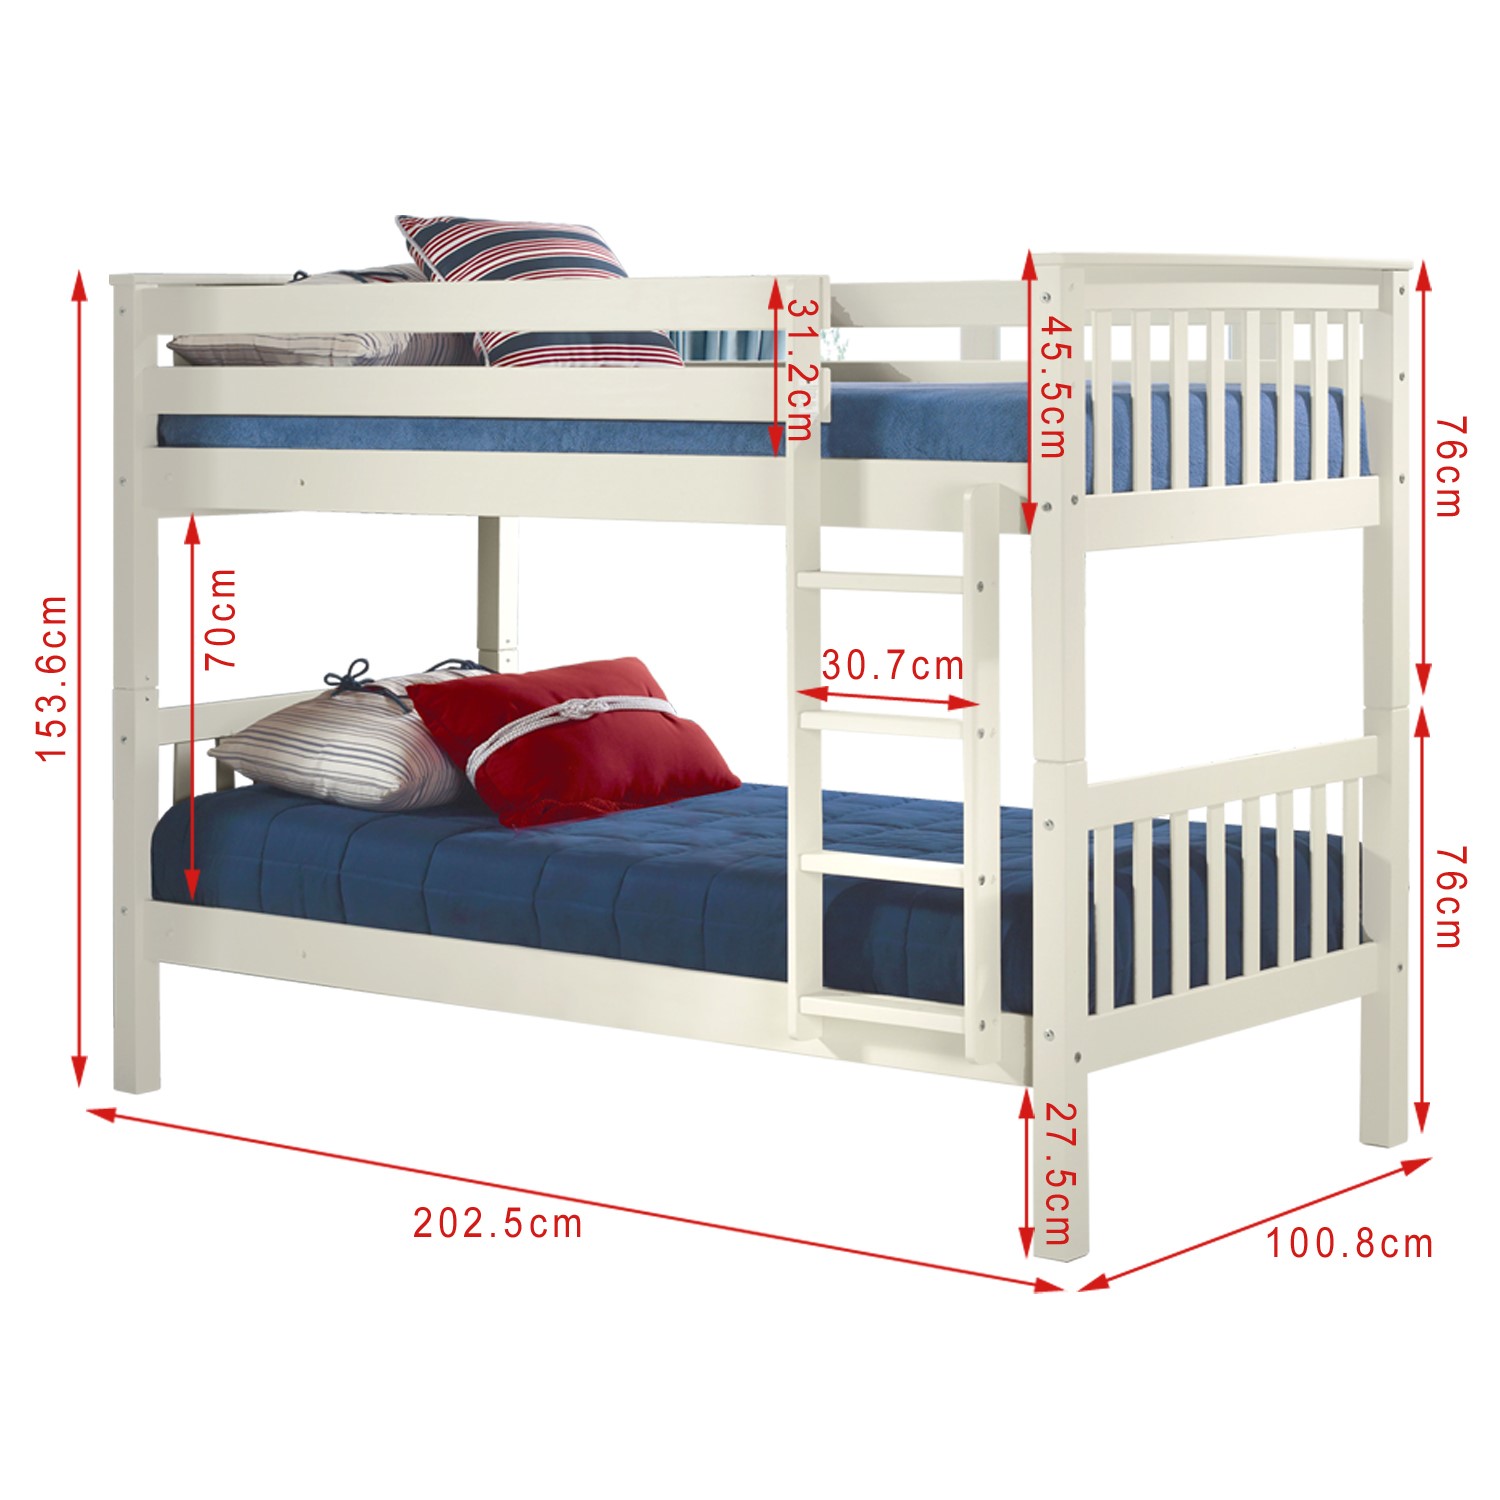 Oxford Single Bunk Bed In White, Bunk Bed Dimensions Height